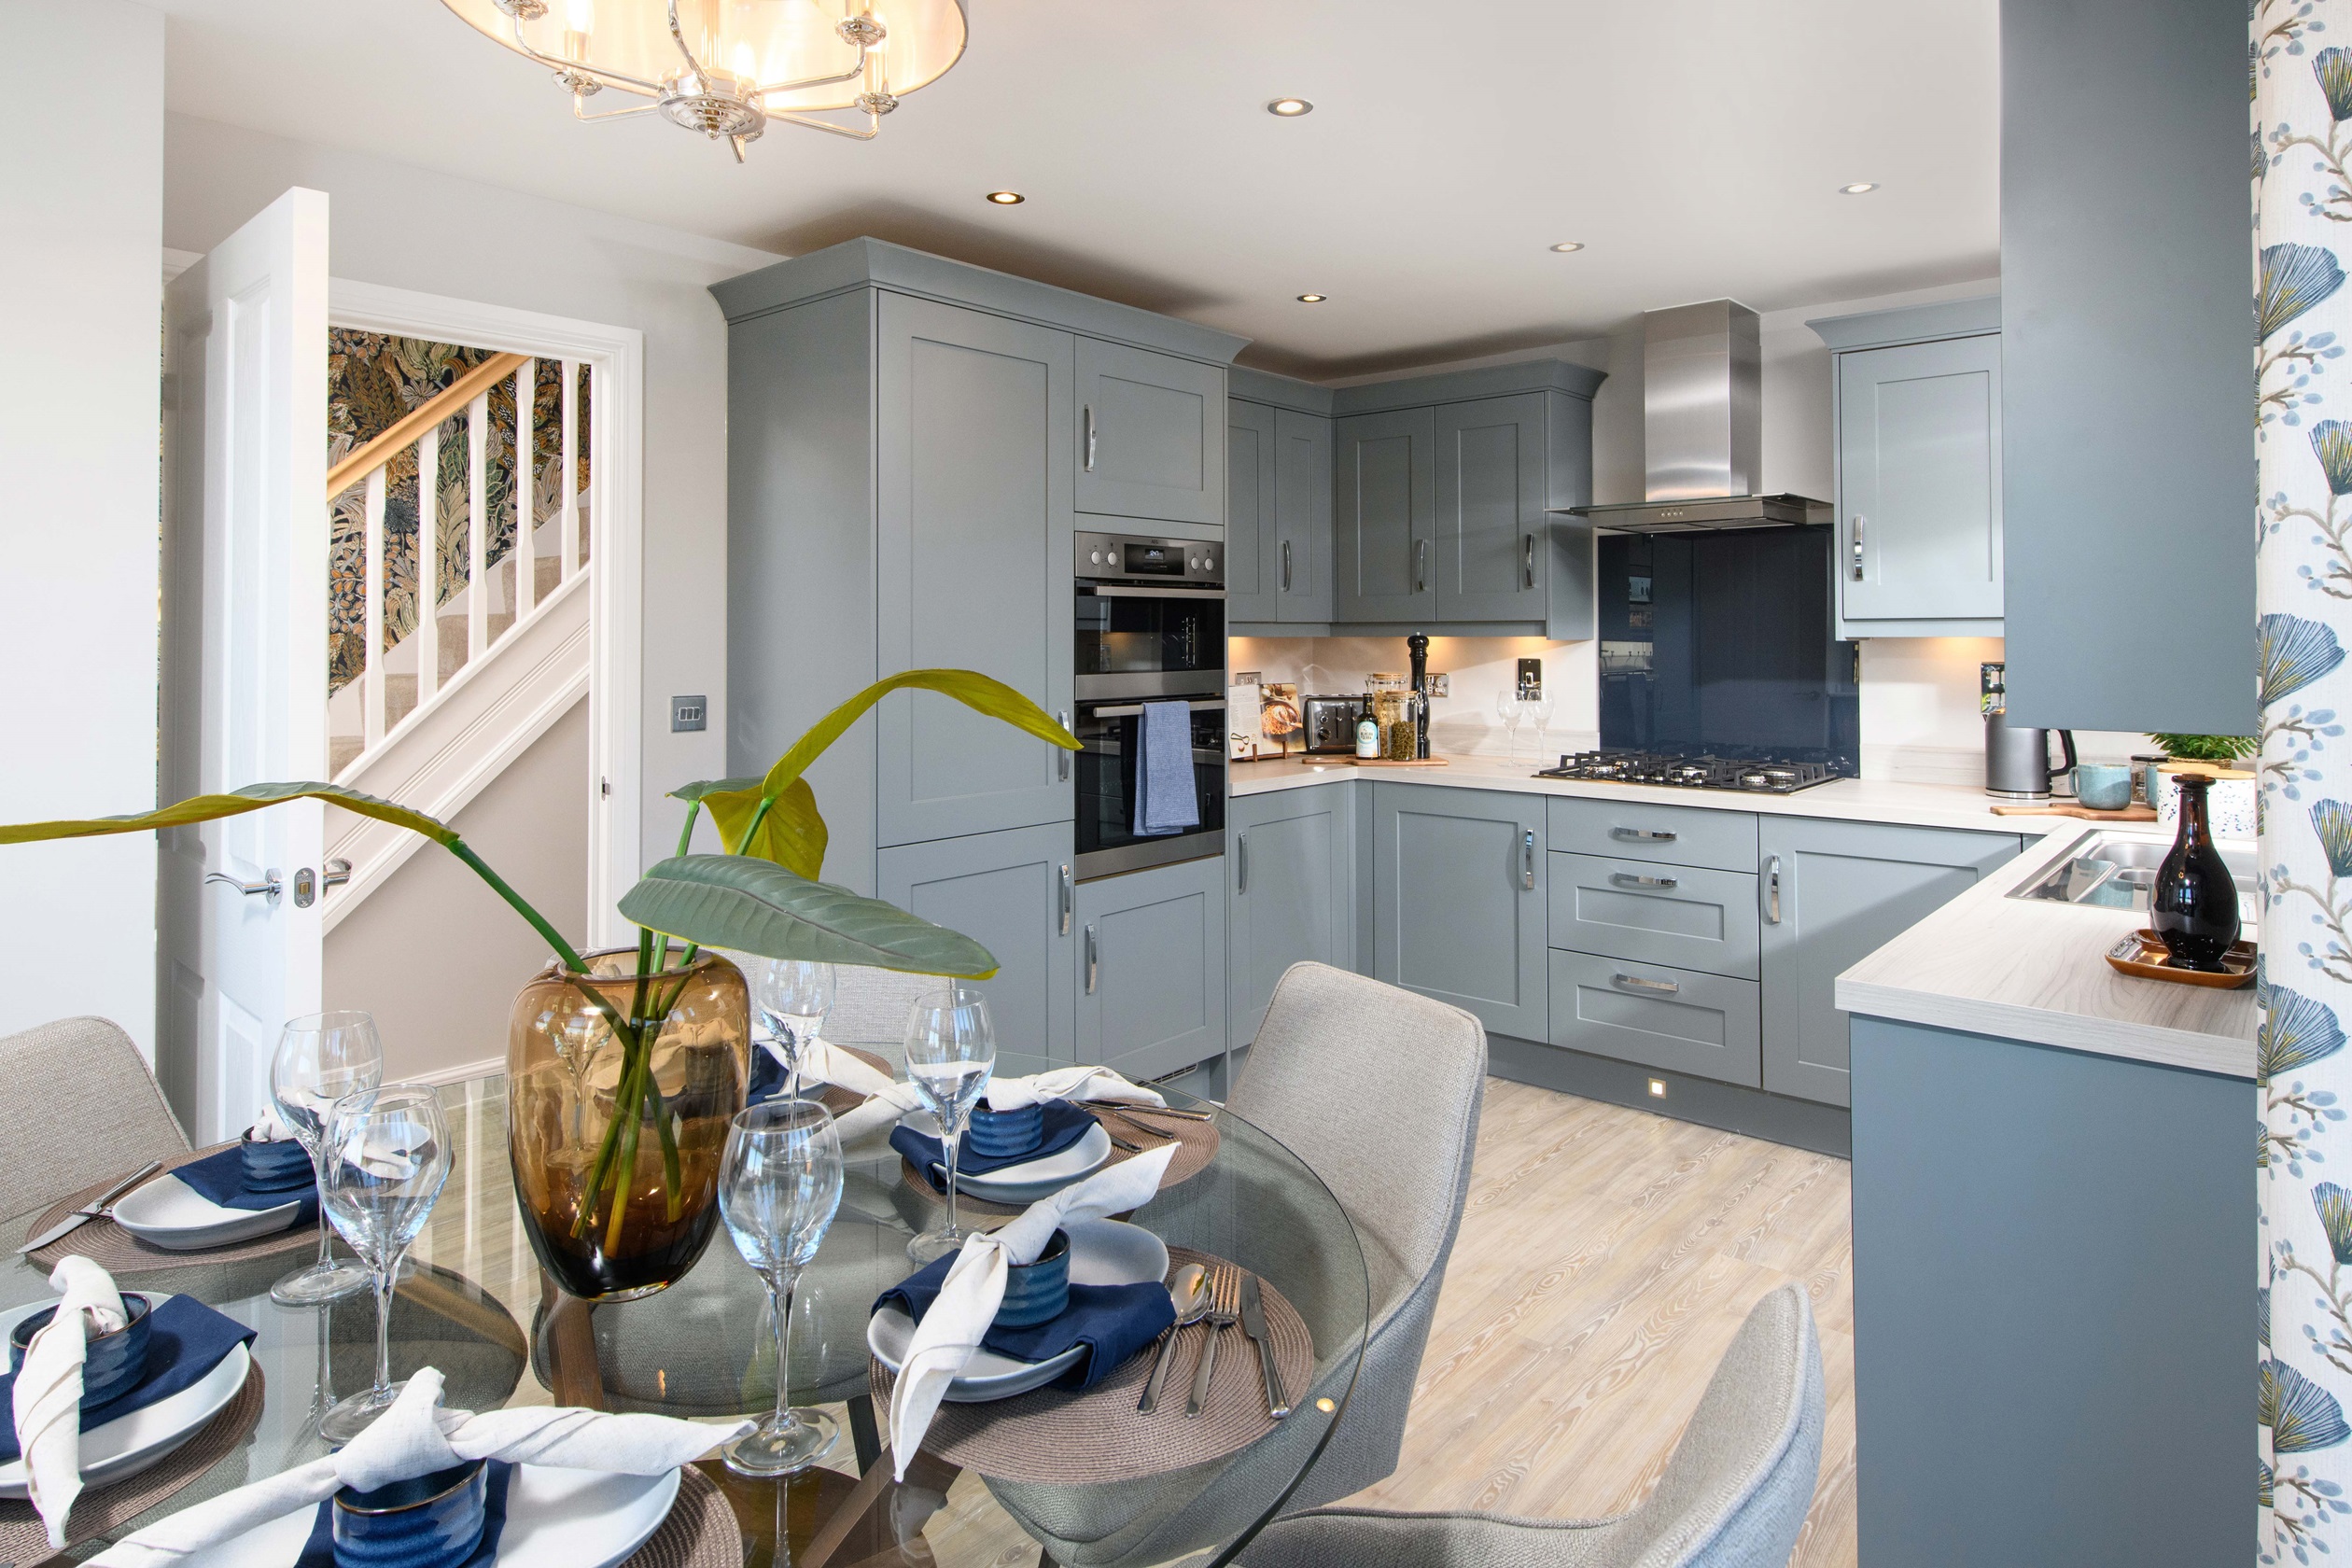 Property 2 of 10. Hesketh Show Home